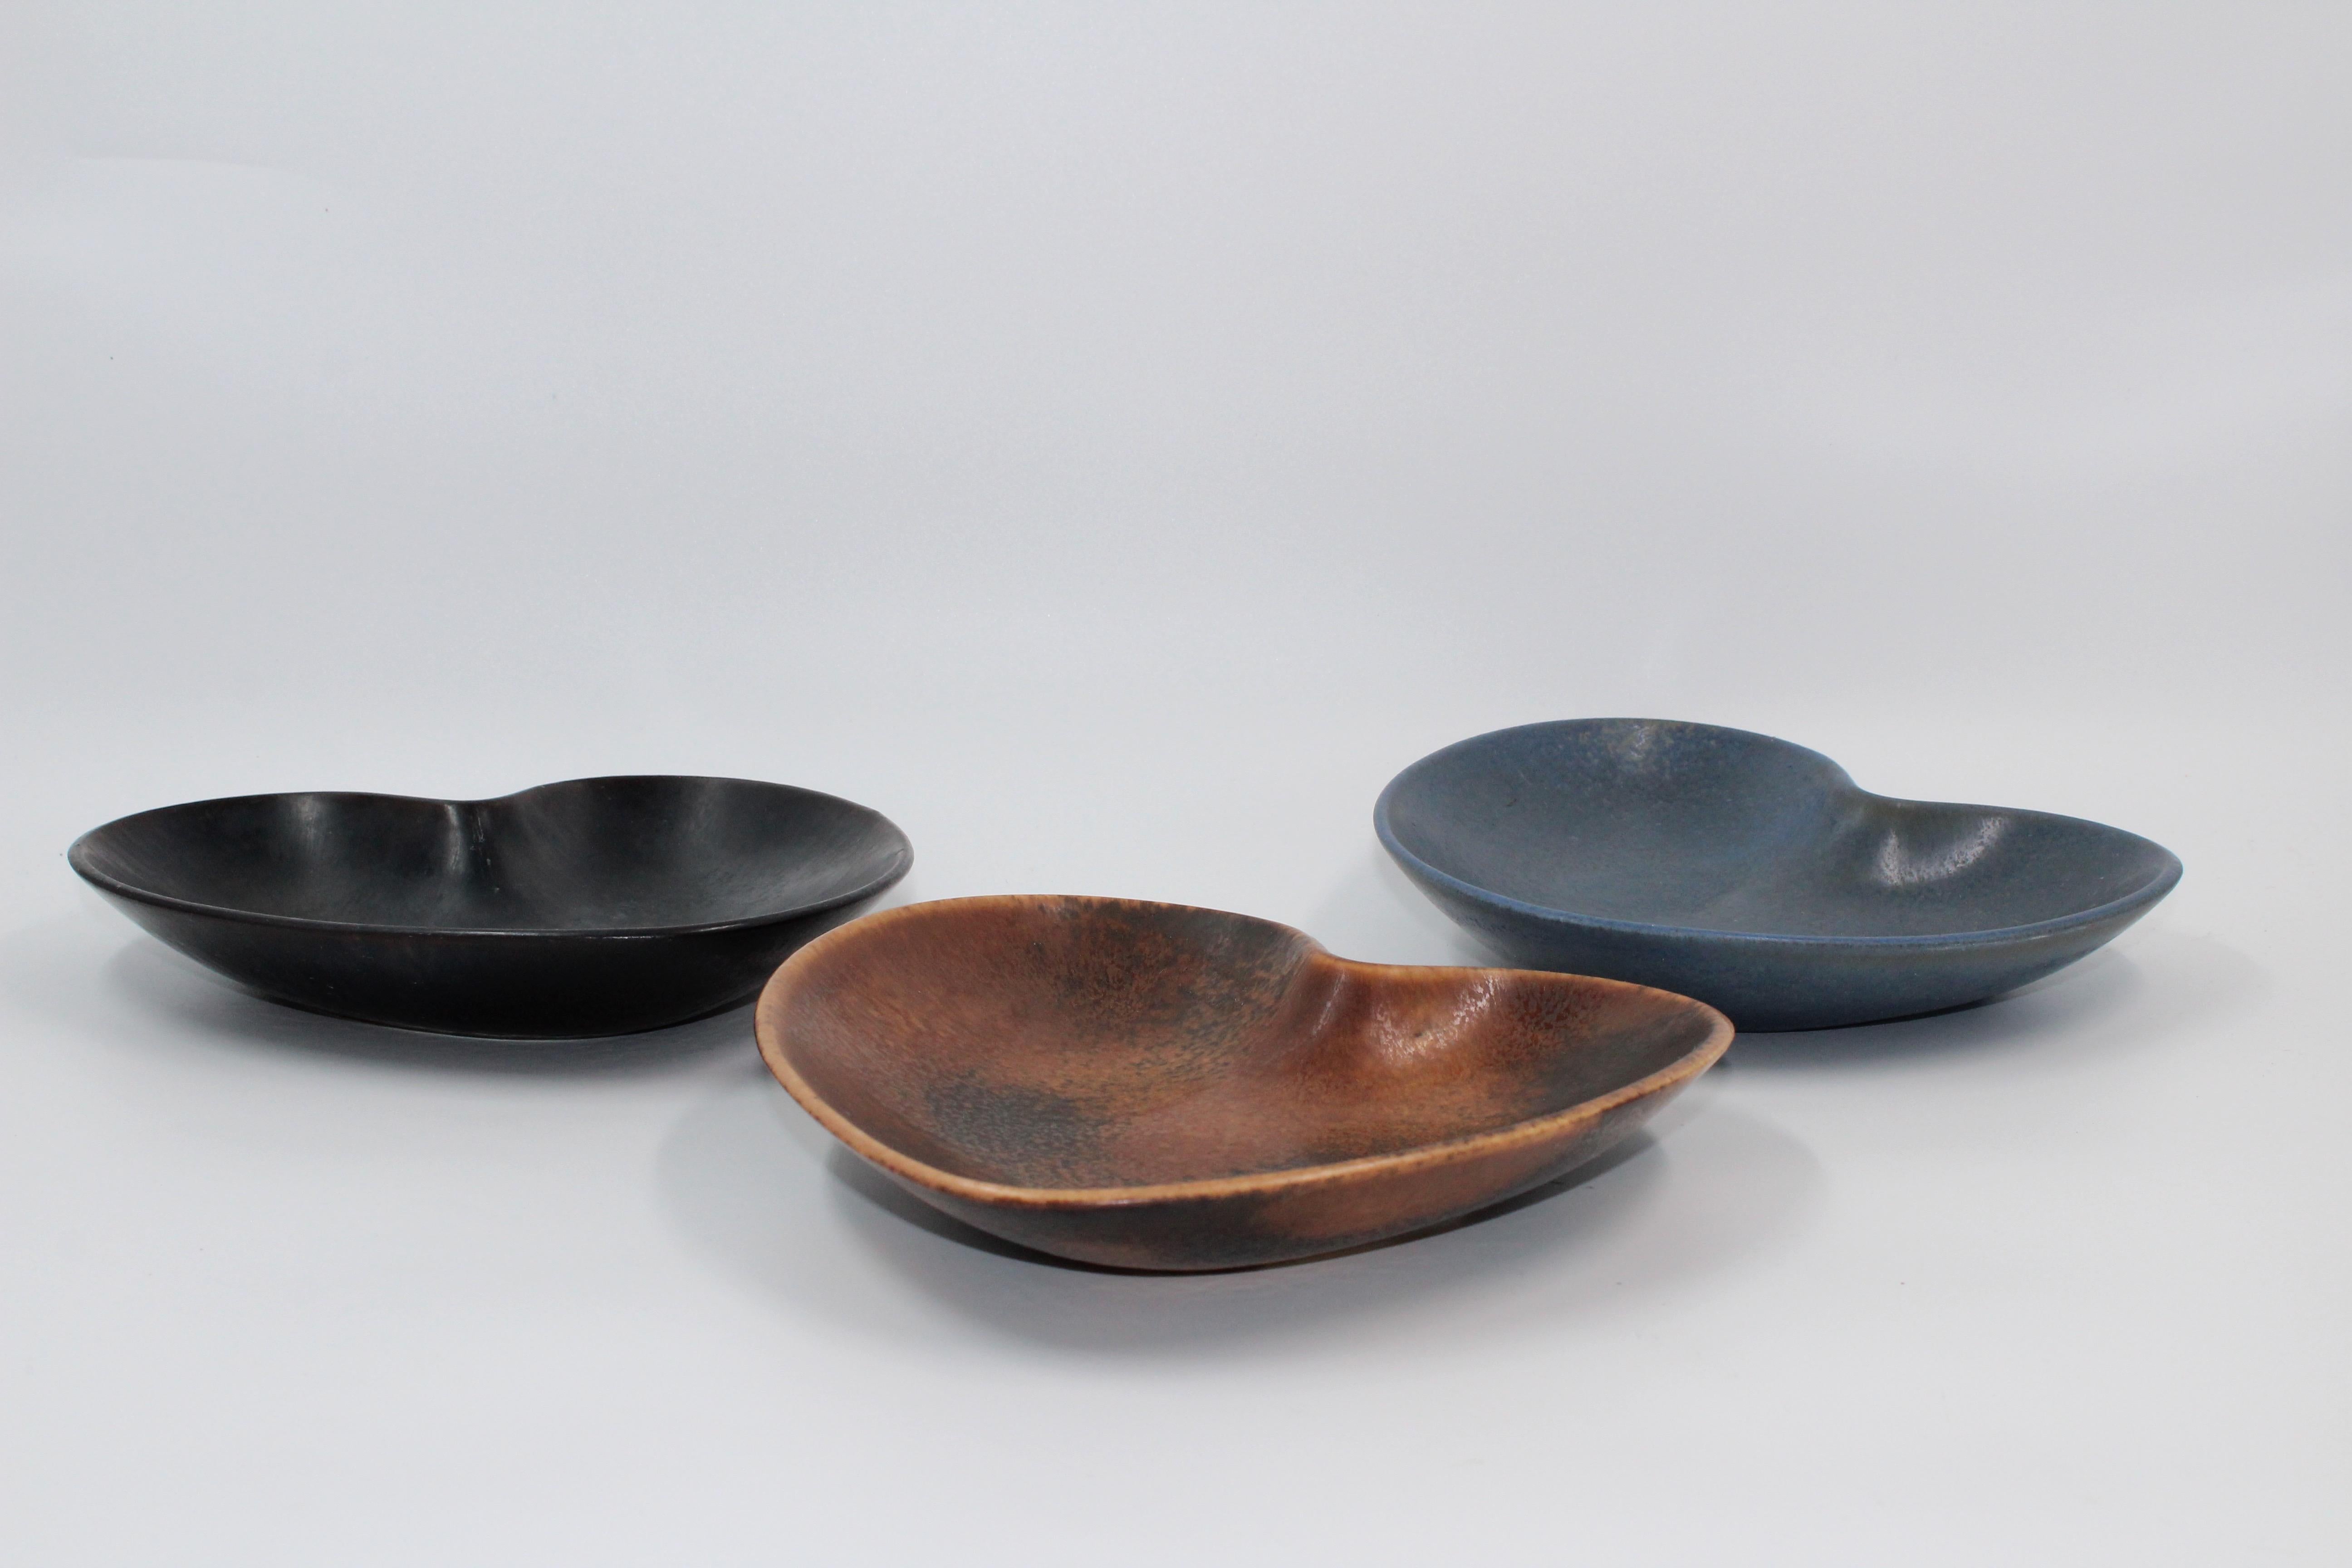 A set of three equally sized heart-shaped ceramic bowls with different glazes designed by Gunnar Nylund. The bowls is in good vintage condition and shows minor signs of usage consistent with age. No damages.